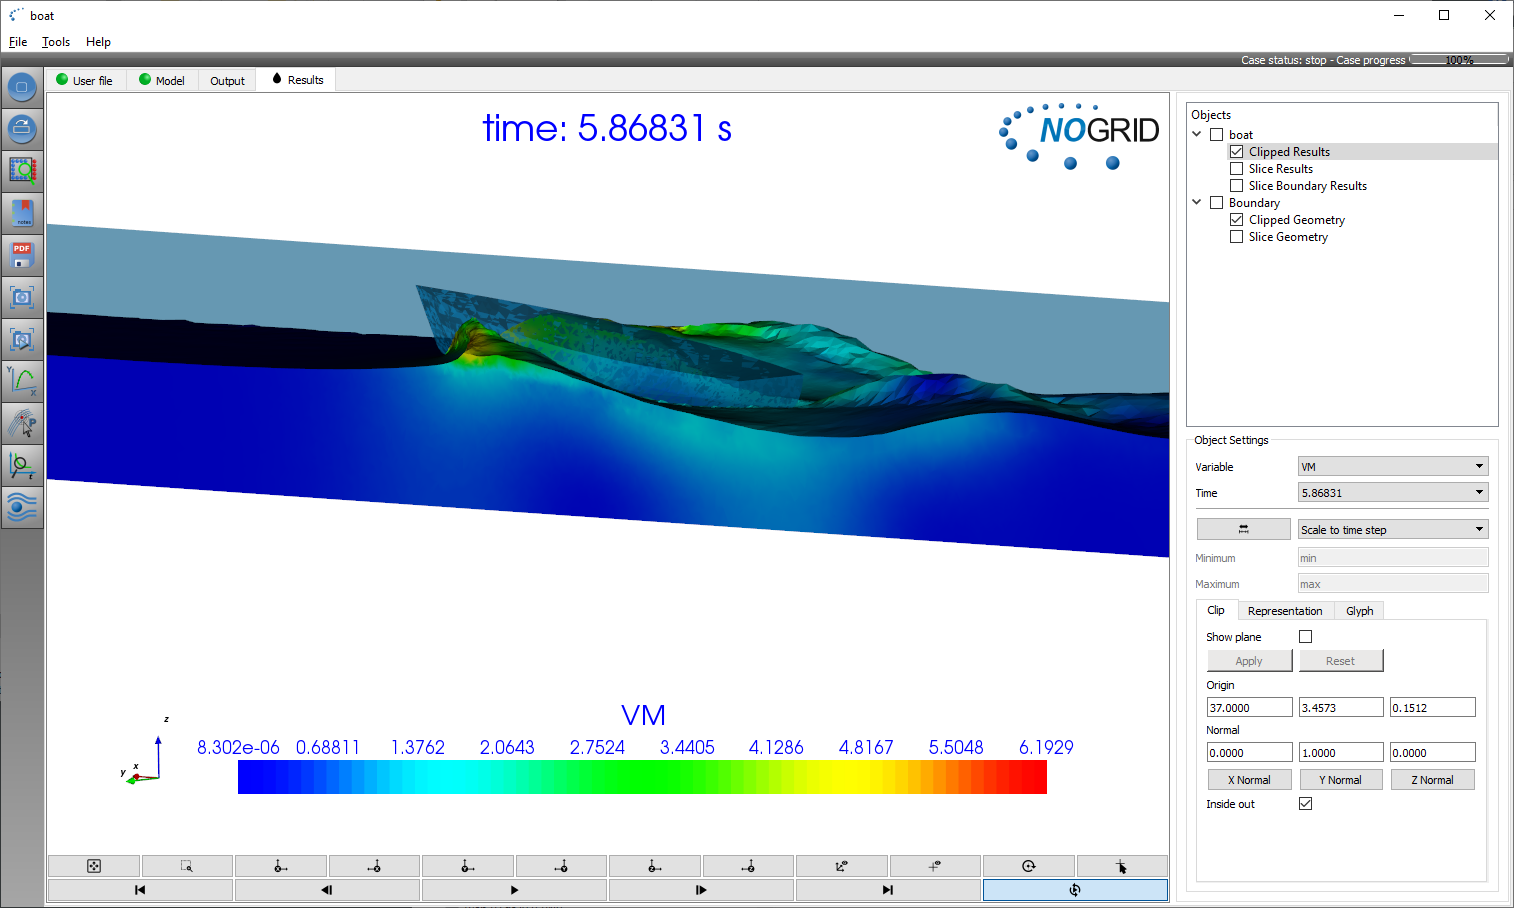 FSI accelerated boat results within NOGRID points' GUI